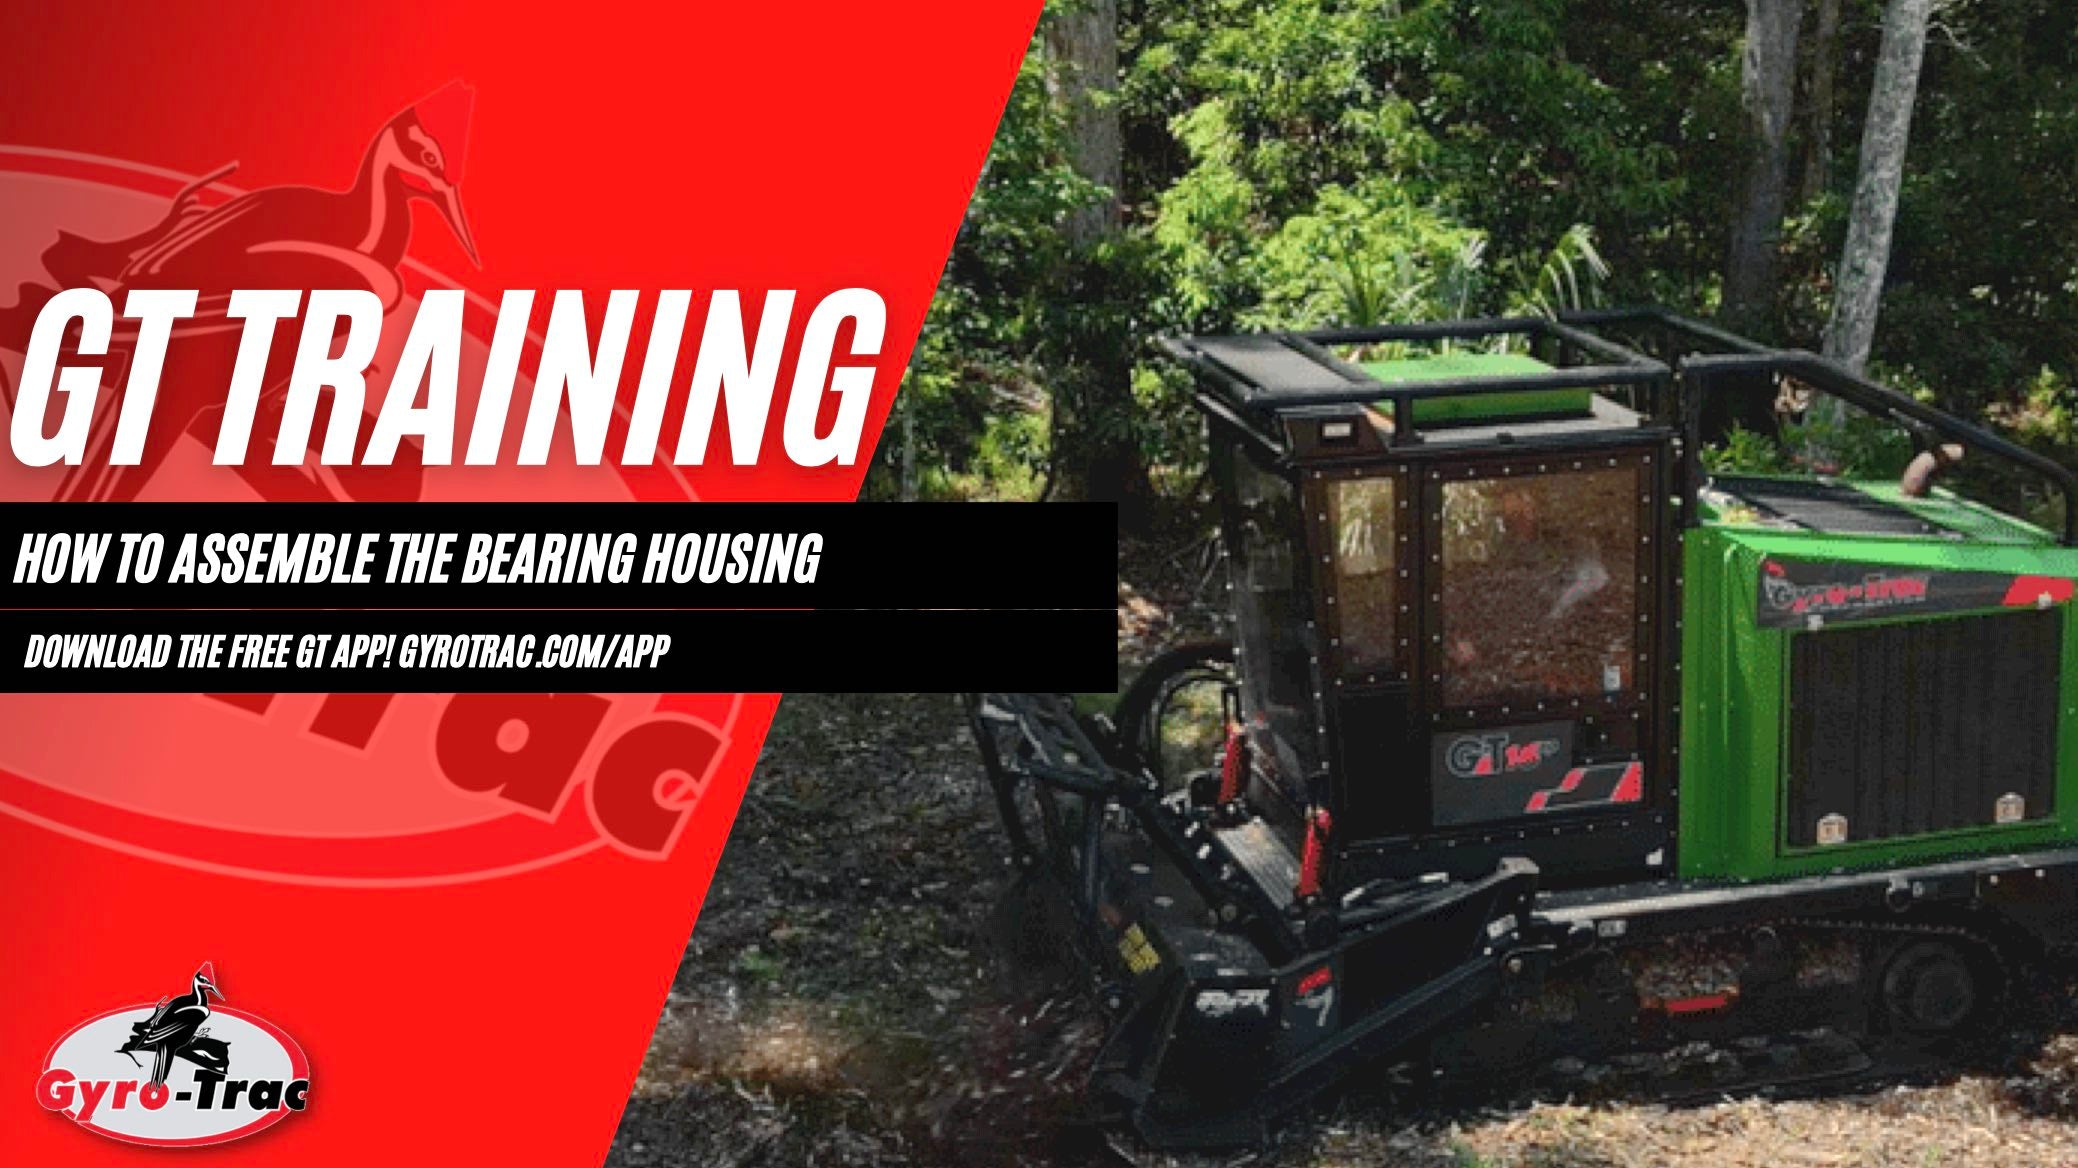 GT Training Video: How to Assemble the Bearing Housing